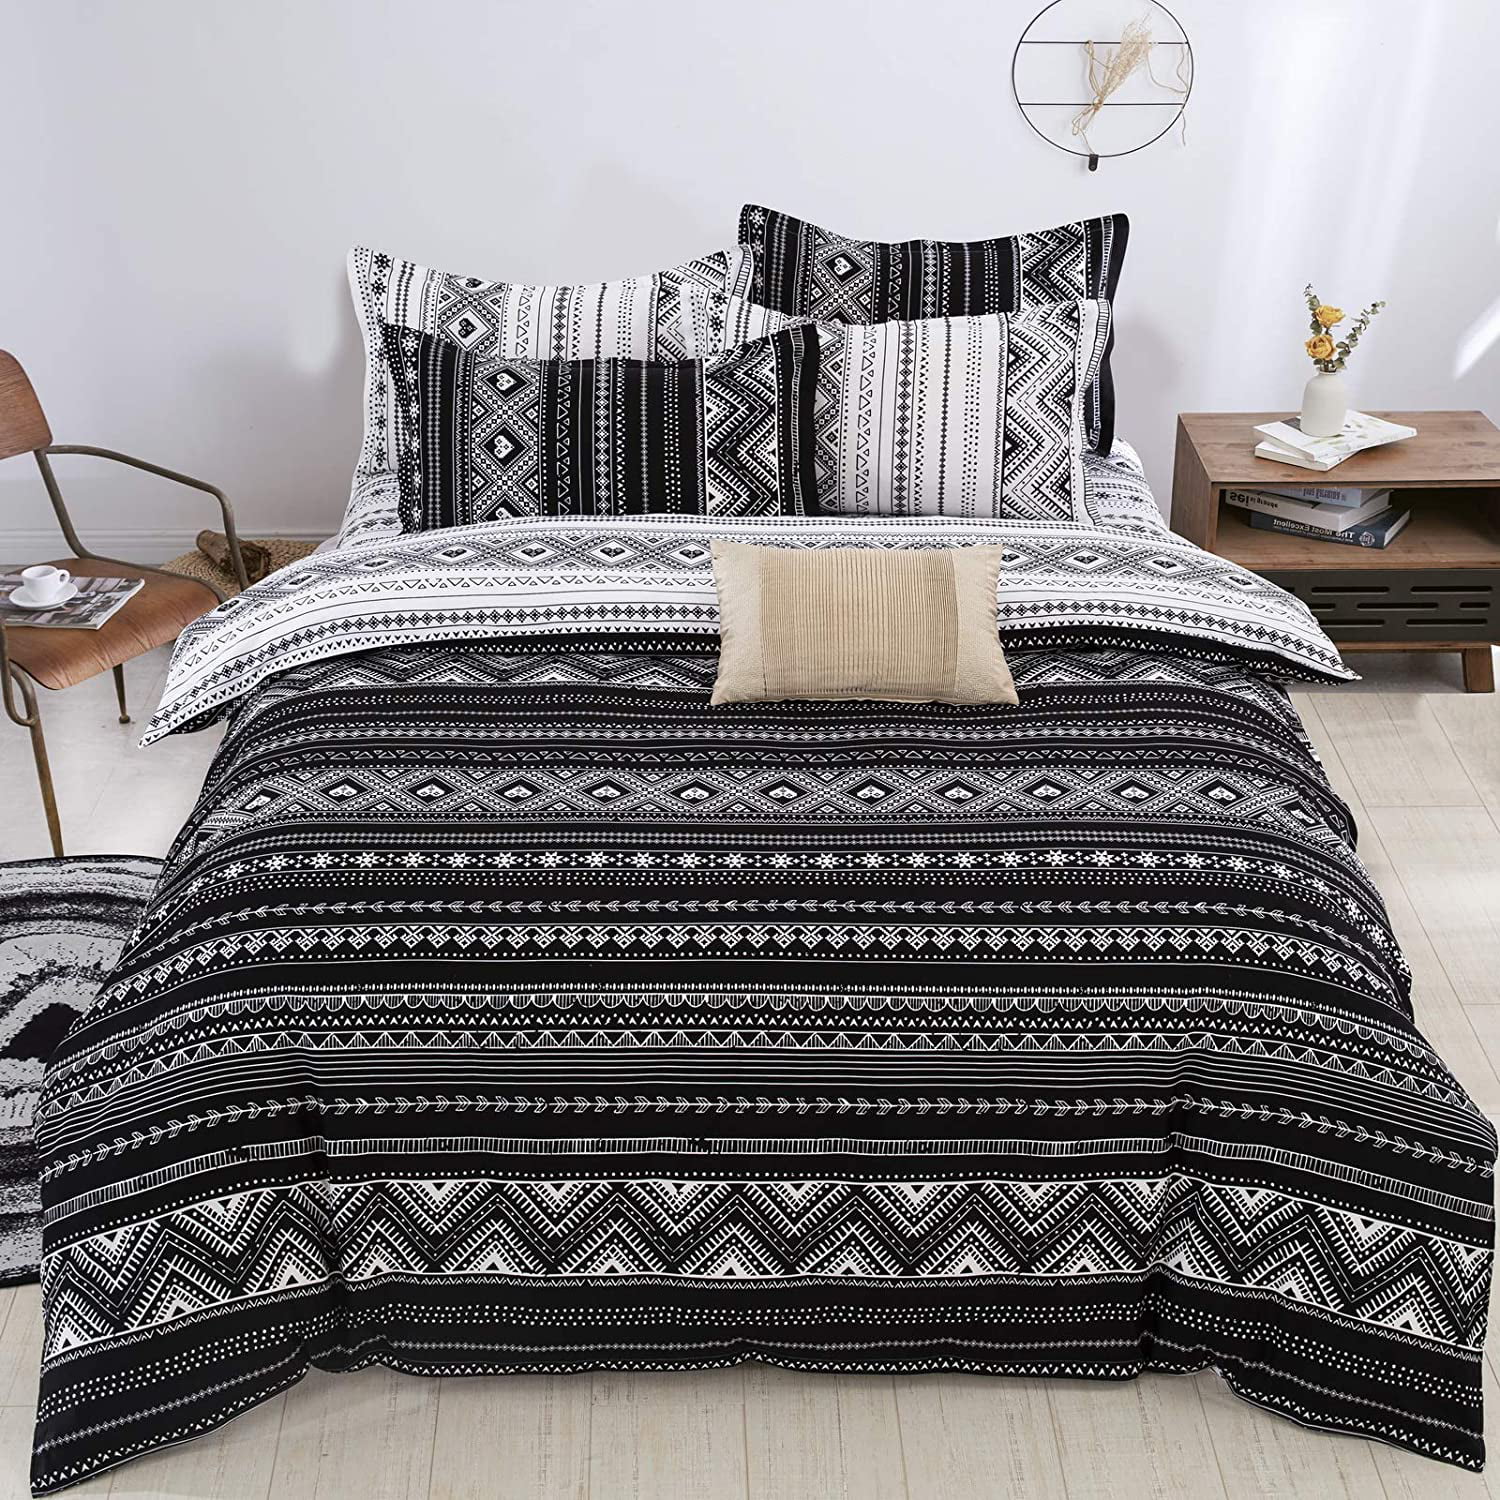 Soft Decorative Fabric Bedding All-Round Elastic Pocket Lunarable Not All Who Wander are Lost Fitted Sheet Aztec Bohemian Geometric Motifs with Angled Lines and Words Green White Queen Size 